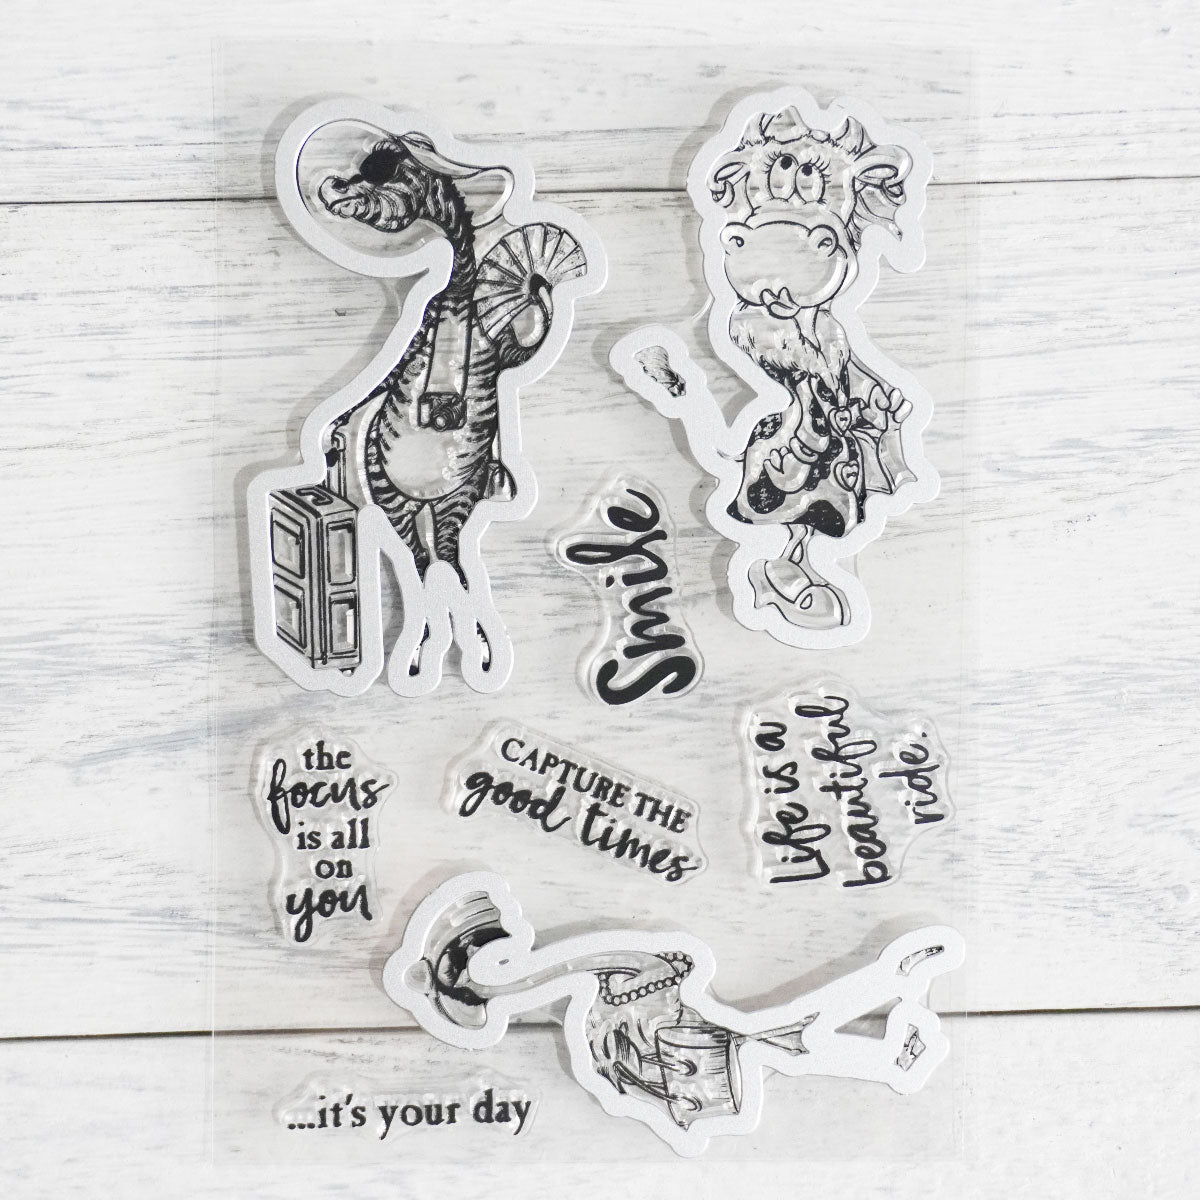 Cute Funny Animal Lady Clear Stamp YX581-S